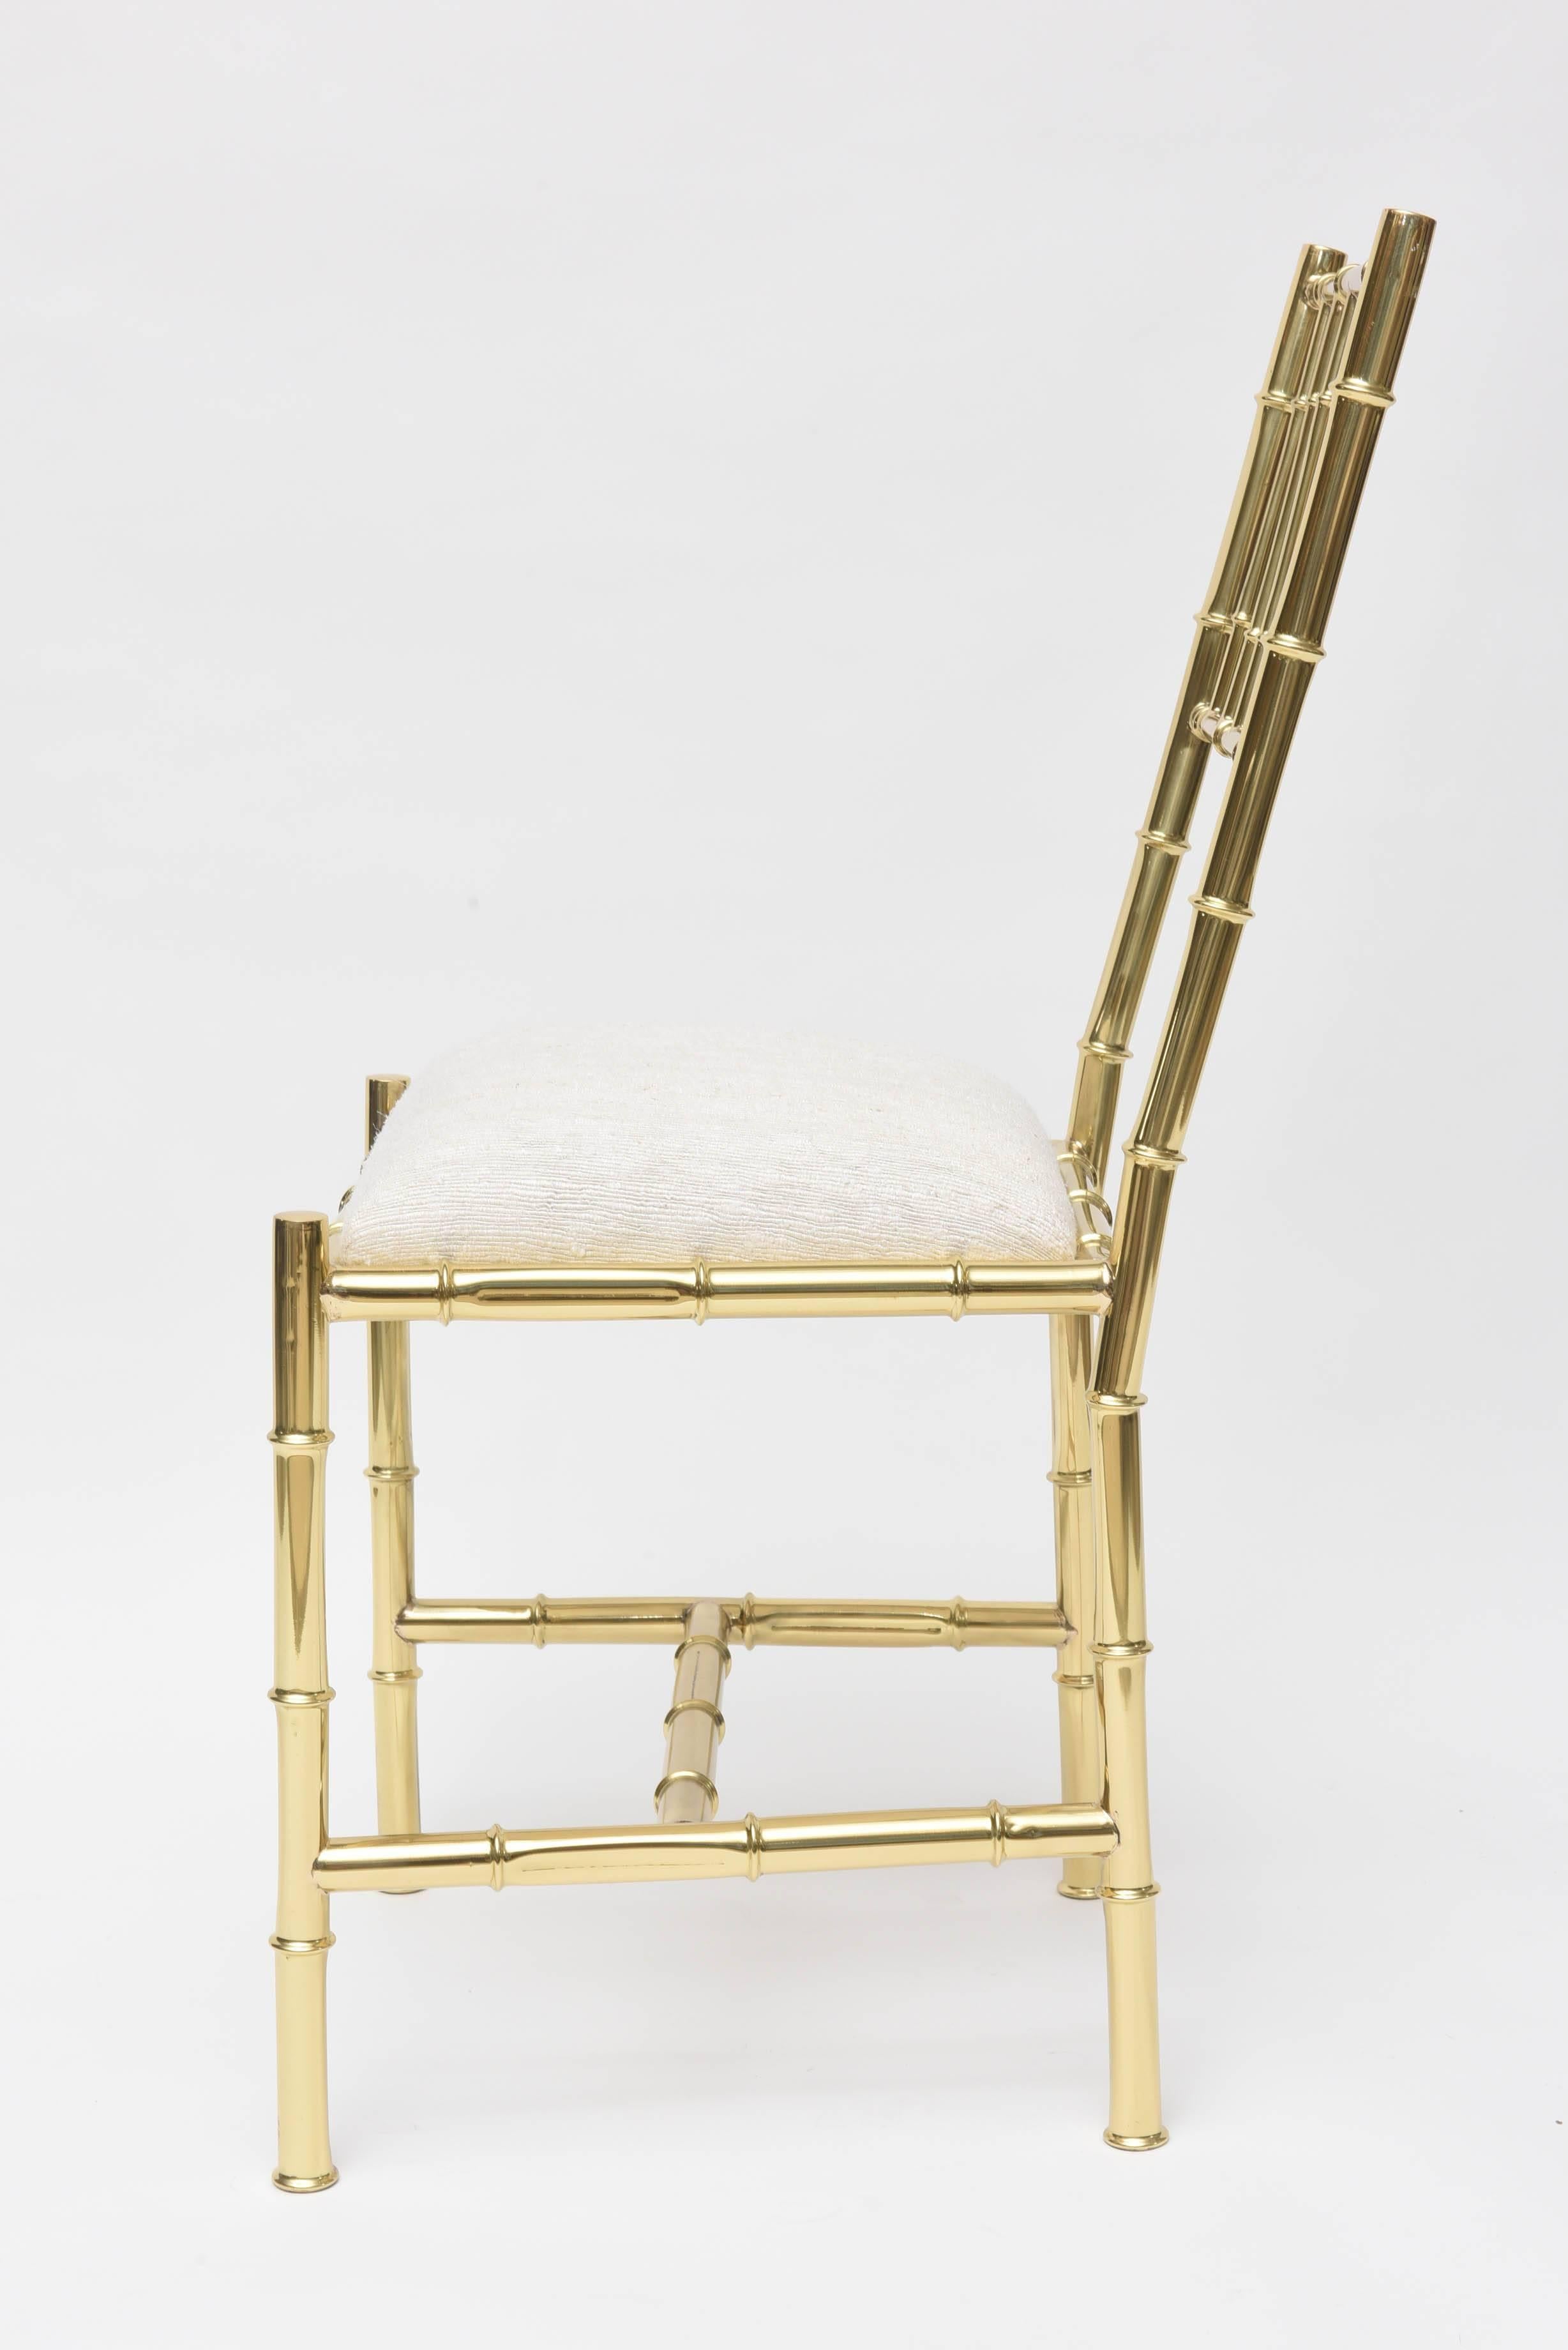 Late 20th Century Italian Faux Bamboo Chair in Polished Brass